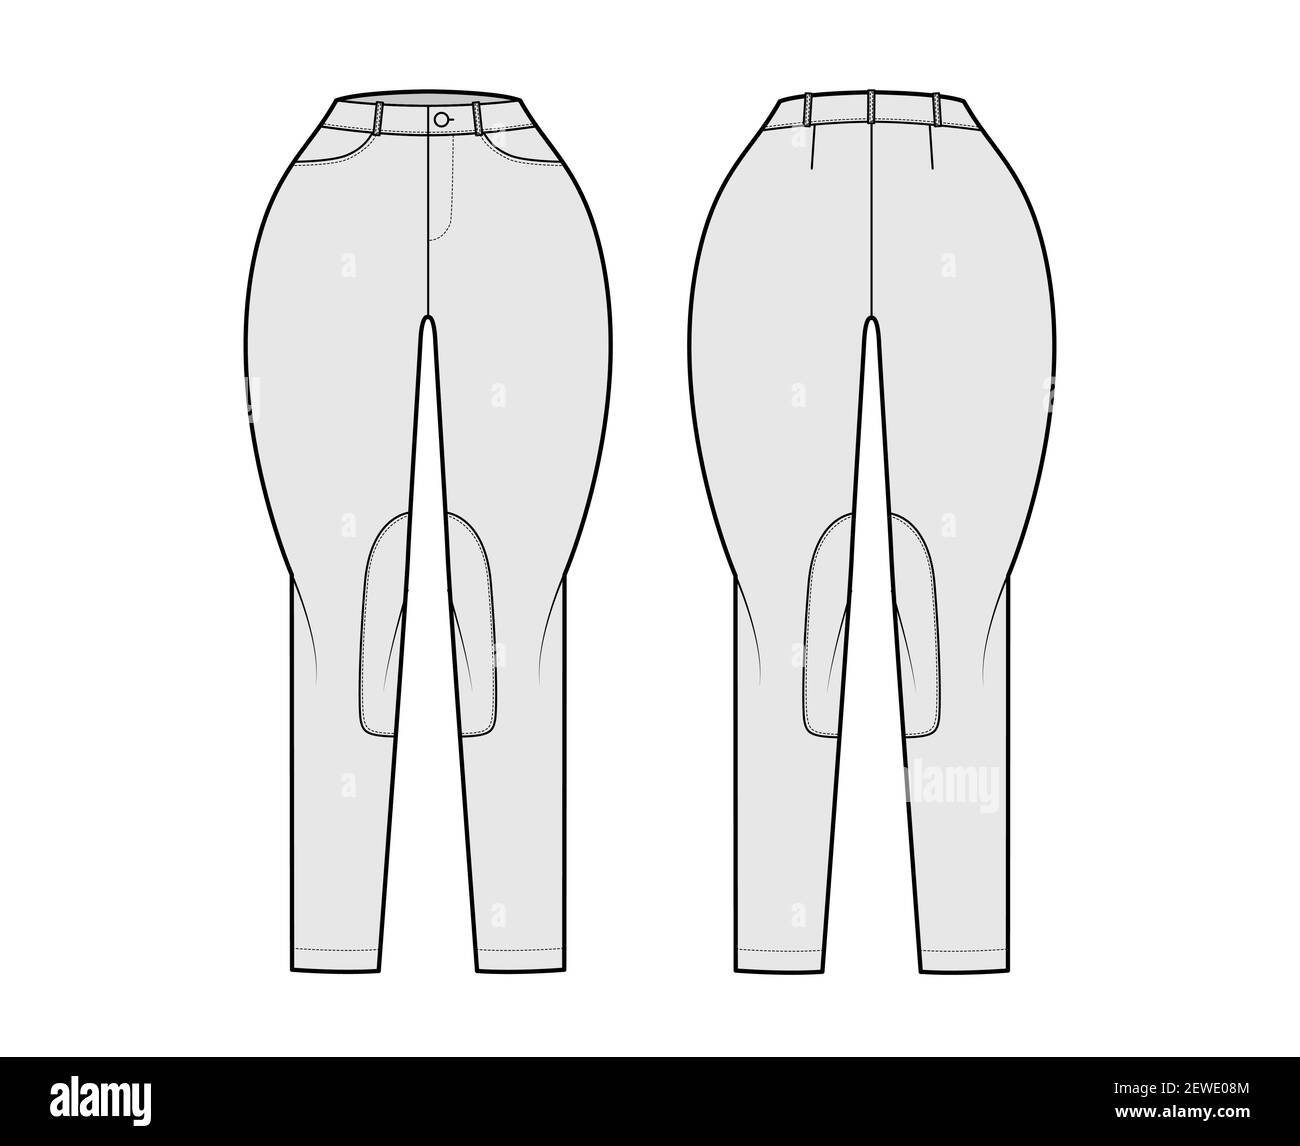 Jeans Classic Jodhpurs Denim pants technical fashion illustration with  normal waist, rise, pockets, belt loops, full lengths. Flat apparel  template front back, grey color style. Women, men CAD mockup Stock Vector  Image